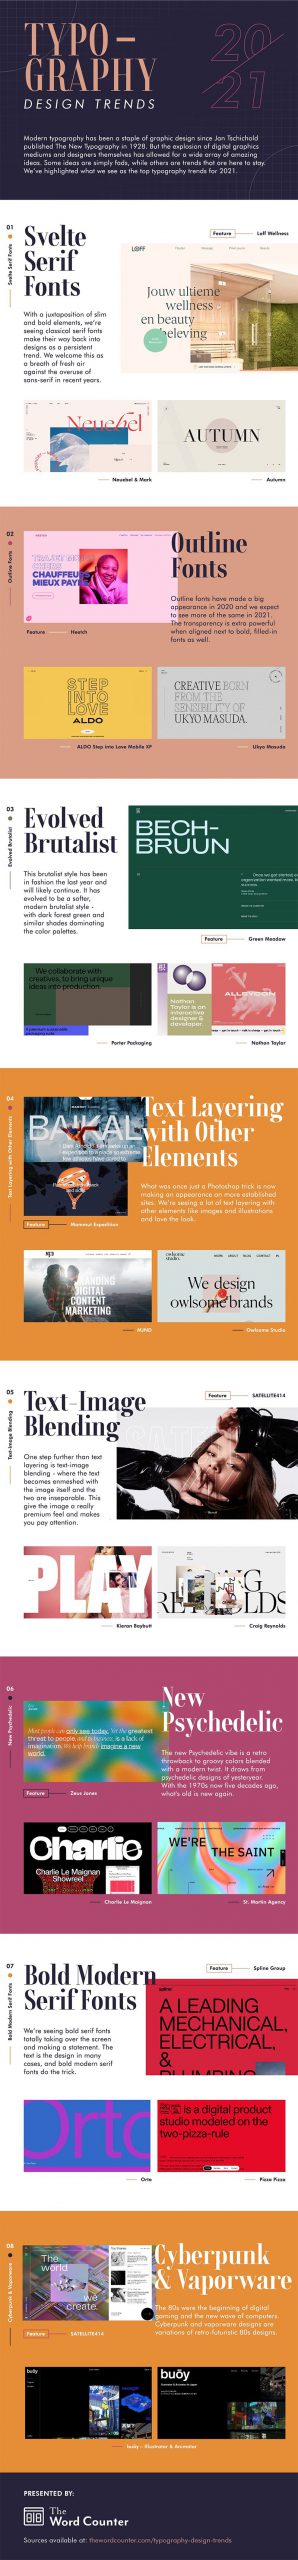 8 typography design trends for a modern business website in 2021 infographic scaled 1